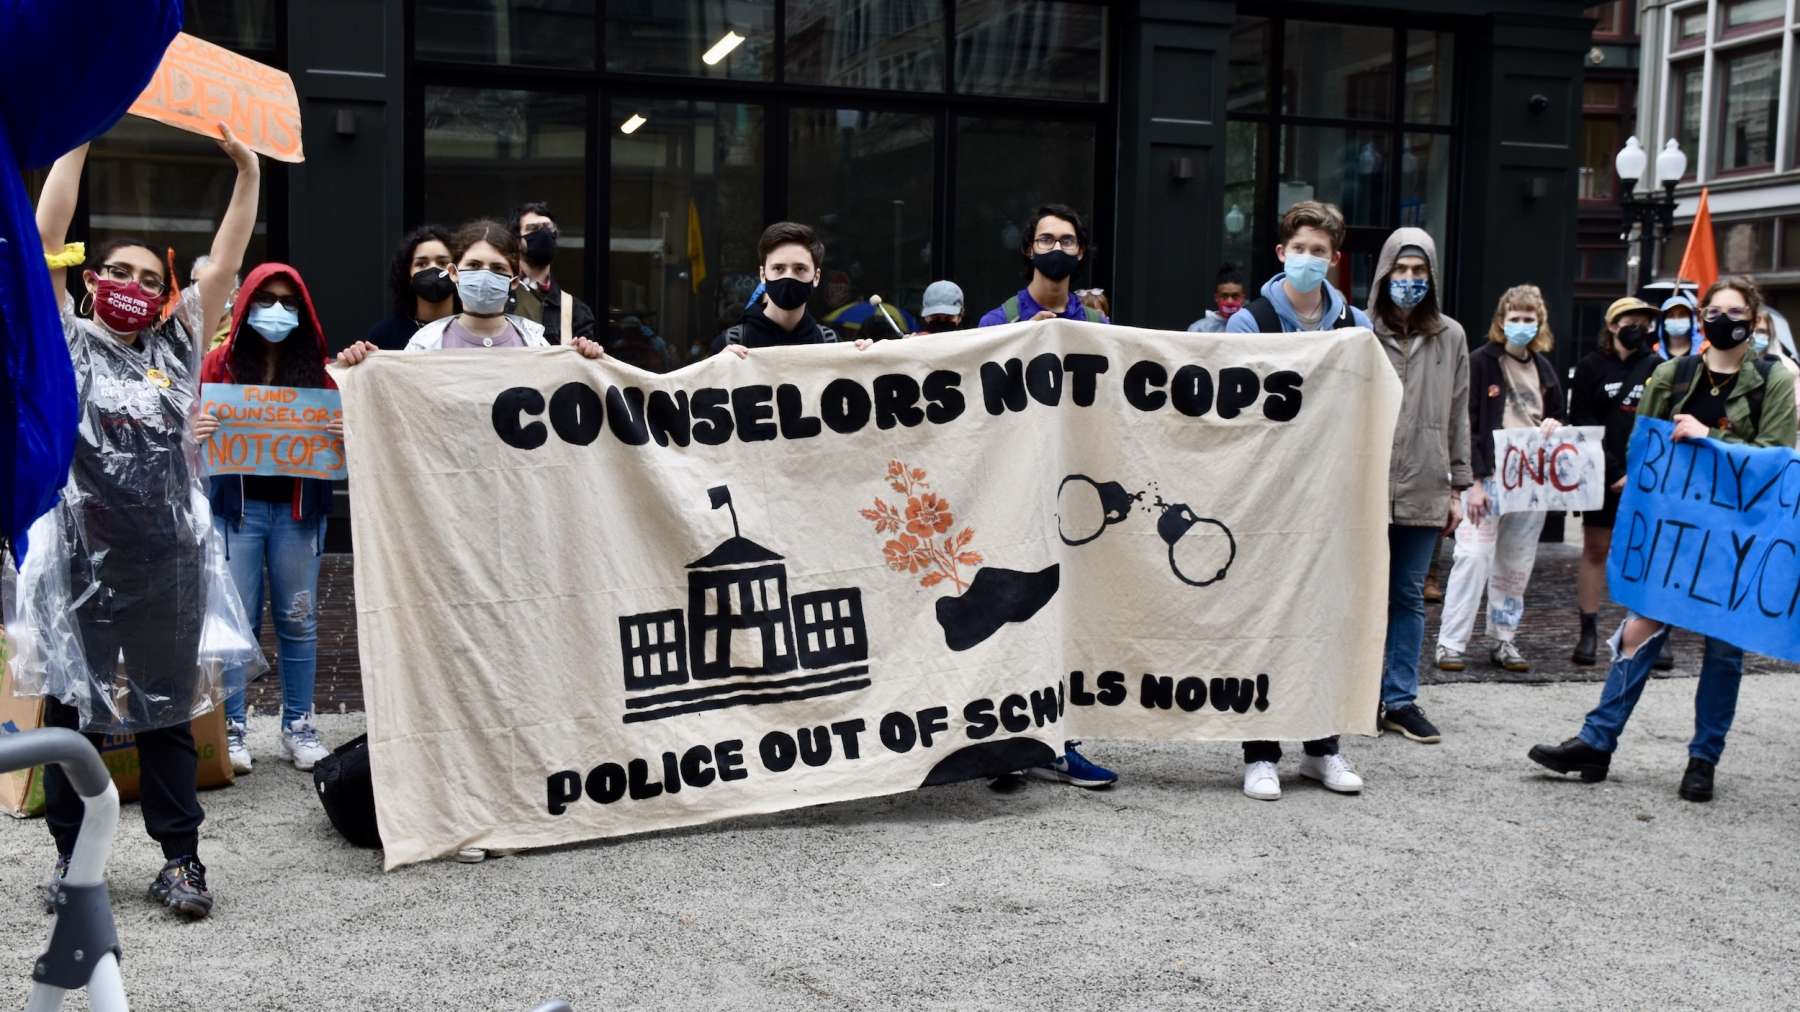 Rhode Island News: Students walkout to demand counselors, not cops in Providence public schools